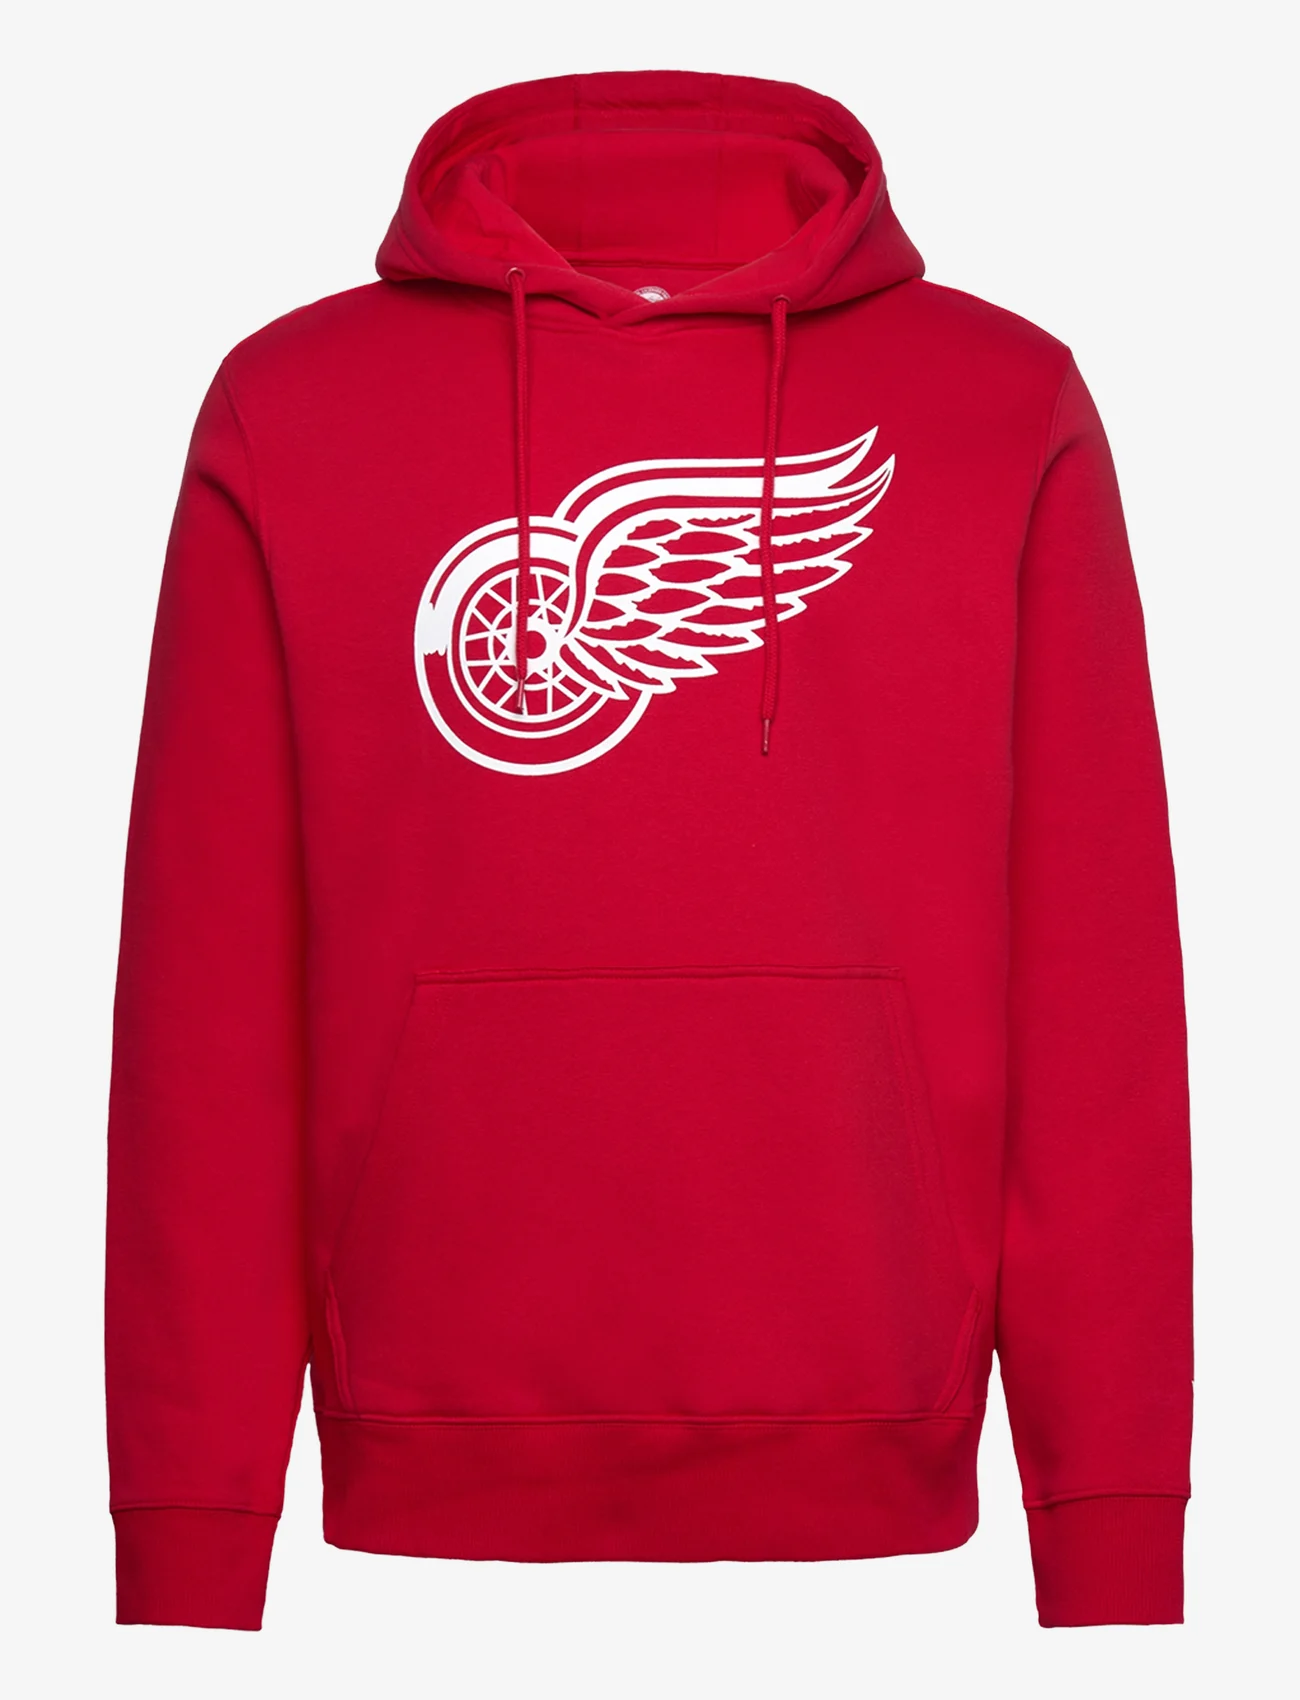 Fanatics - Detroit Red Wings Primary Logo Graphic Hoodie - hættetrøjer - athletic red - 0